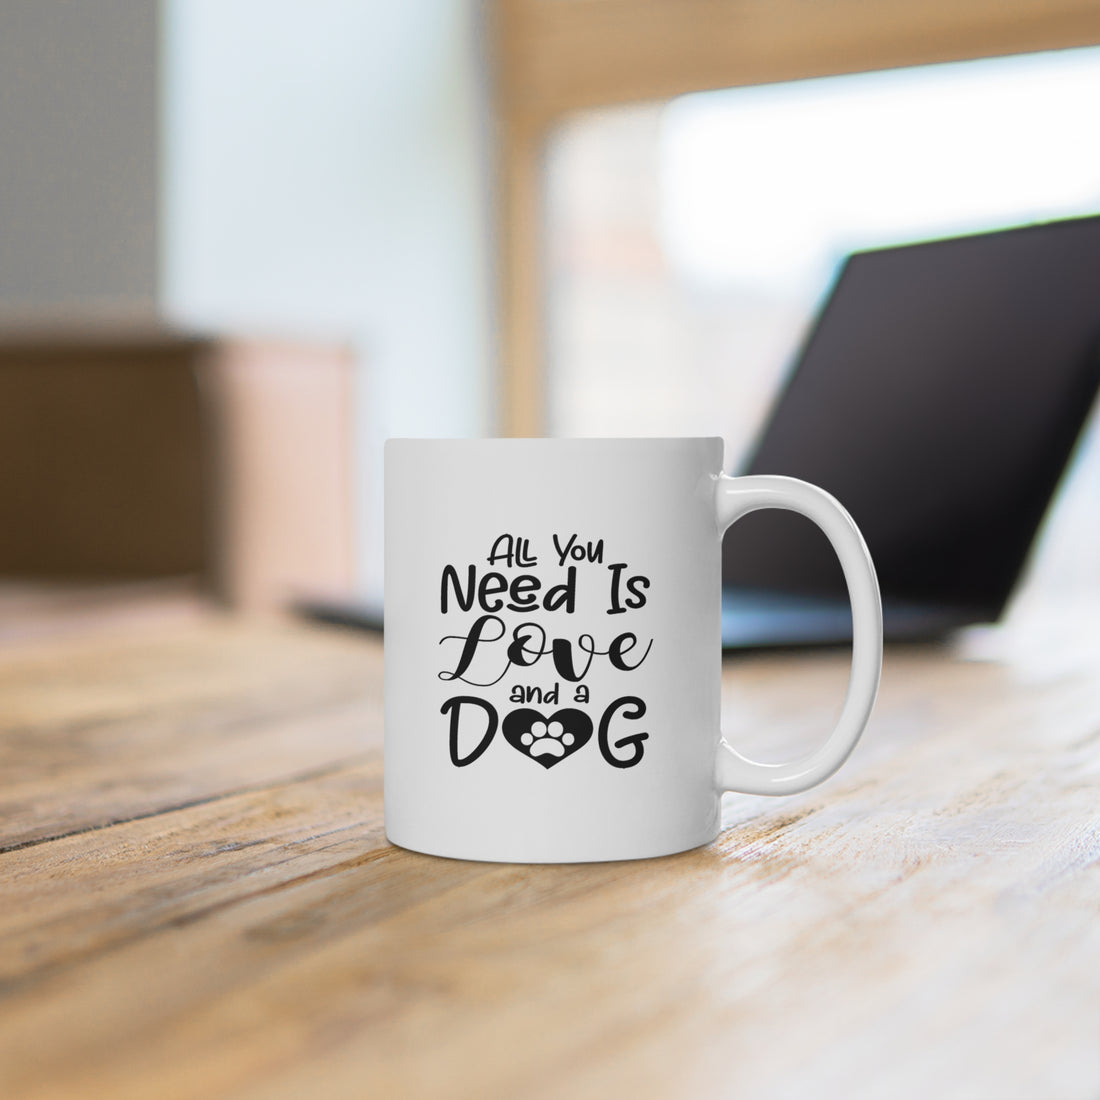 All You Need Is Love &amp; A Dog - White Ceramic Mug 2 sizes Available